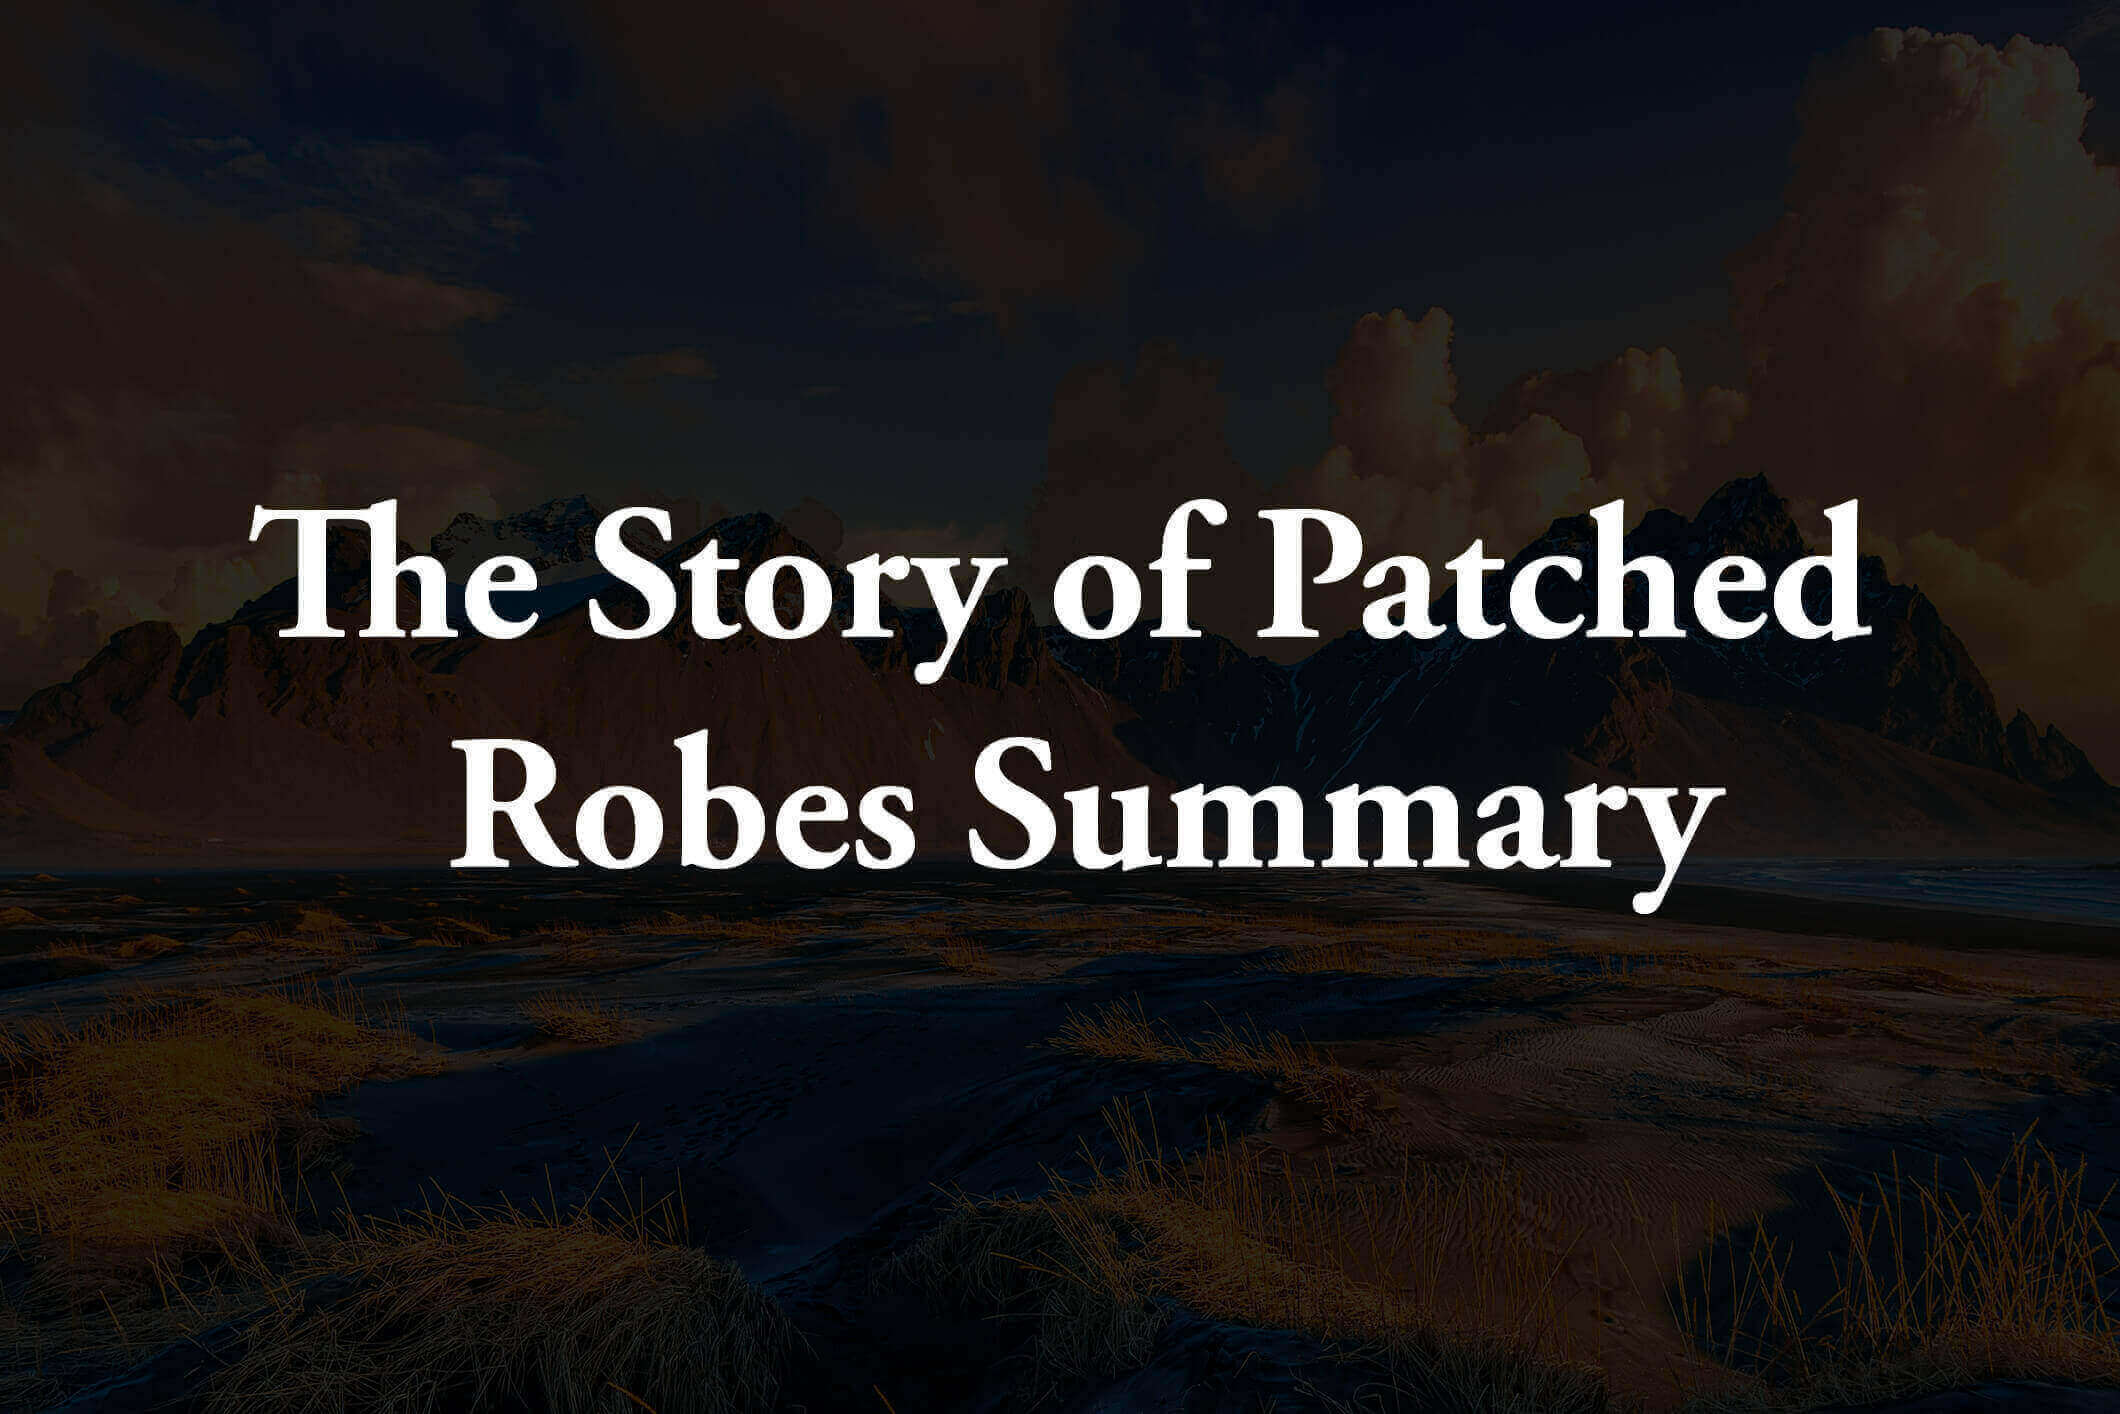 The Story of Patched Robes Summary - Islamic Story